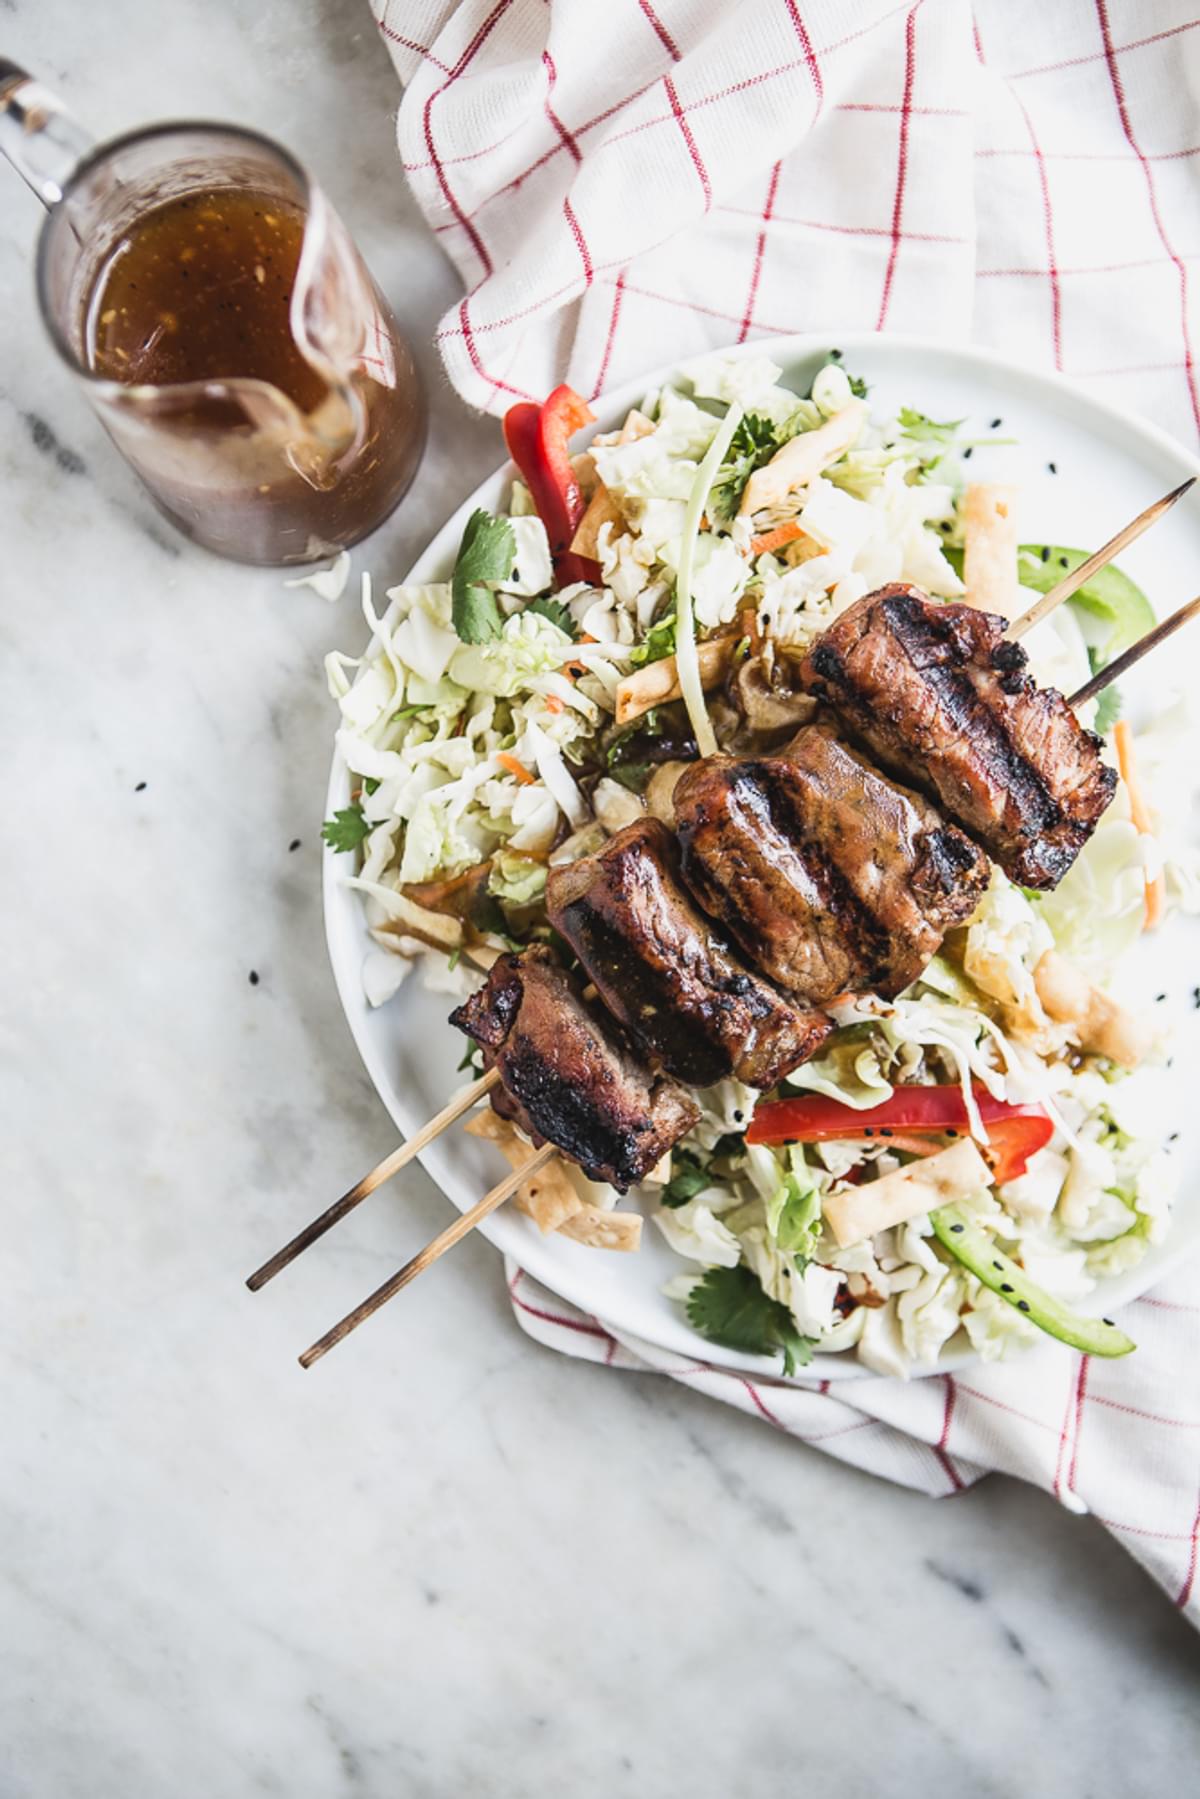 Asian Chopped Salad with Hoisin Marinated Pork Kabab on a plate with red and green bell peppers and sesame seeds